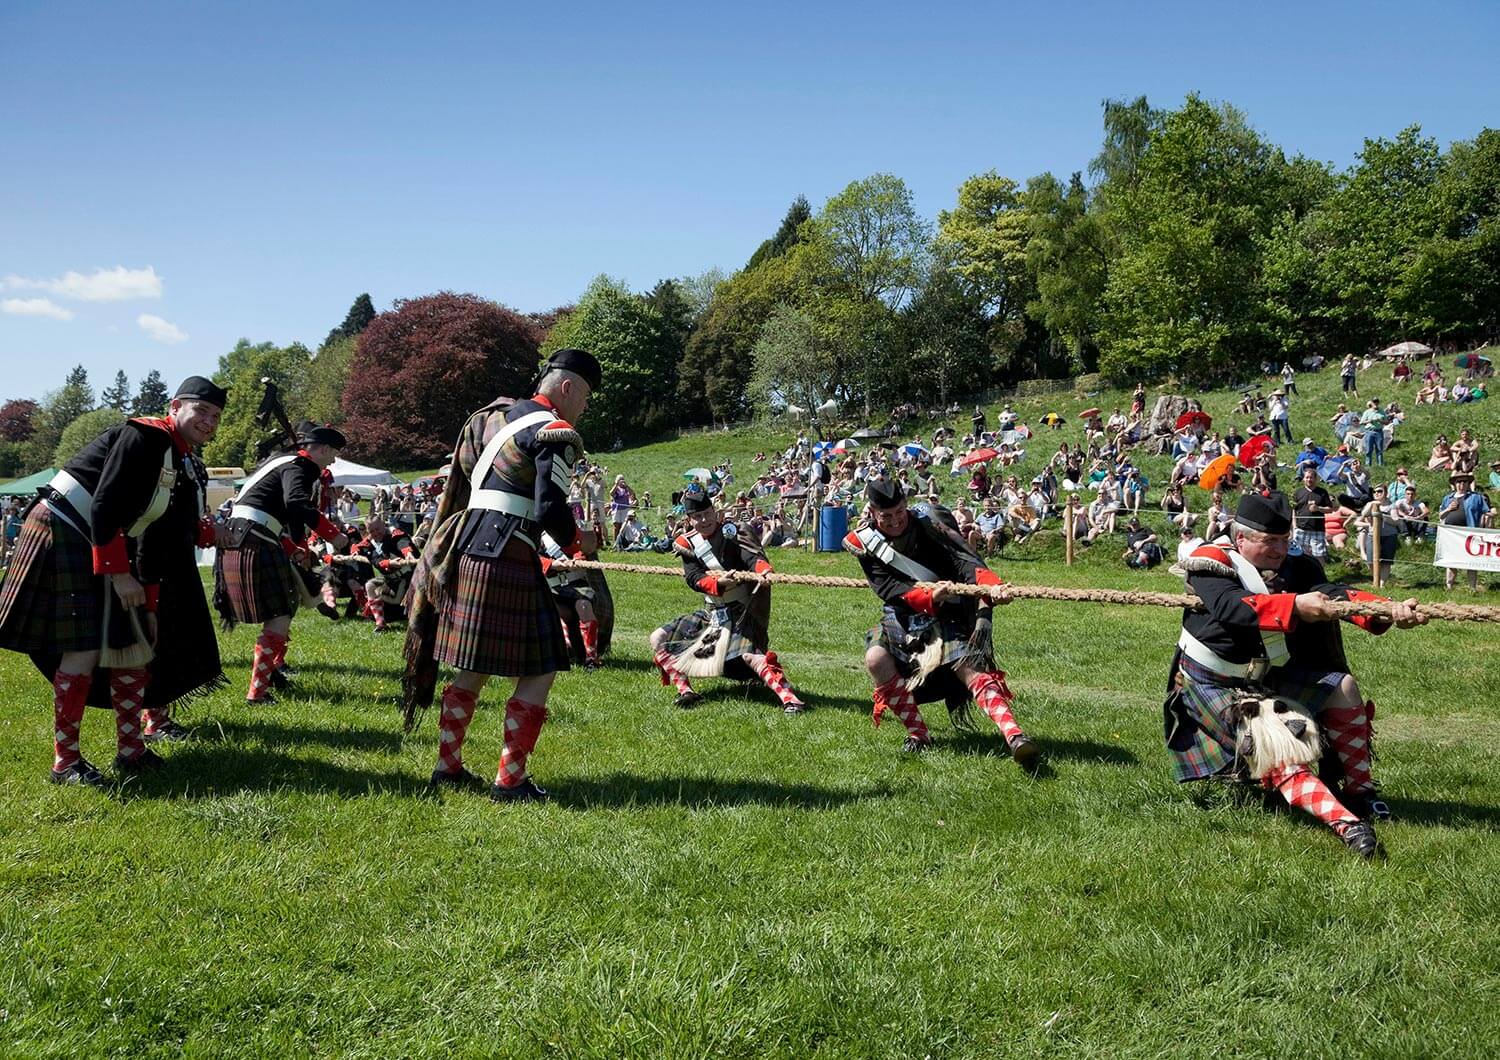 People competing in a tug o'war competition at the Scottish Highland Games 